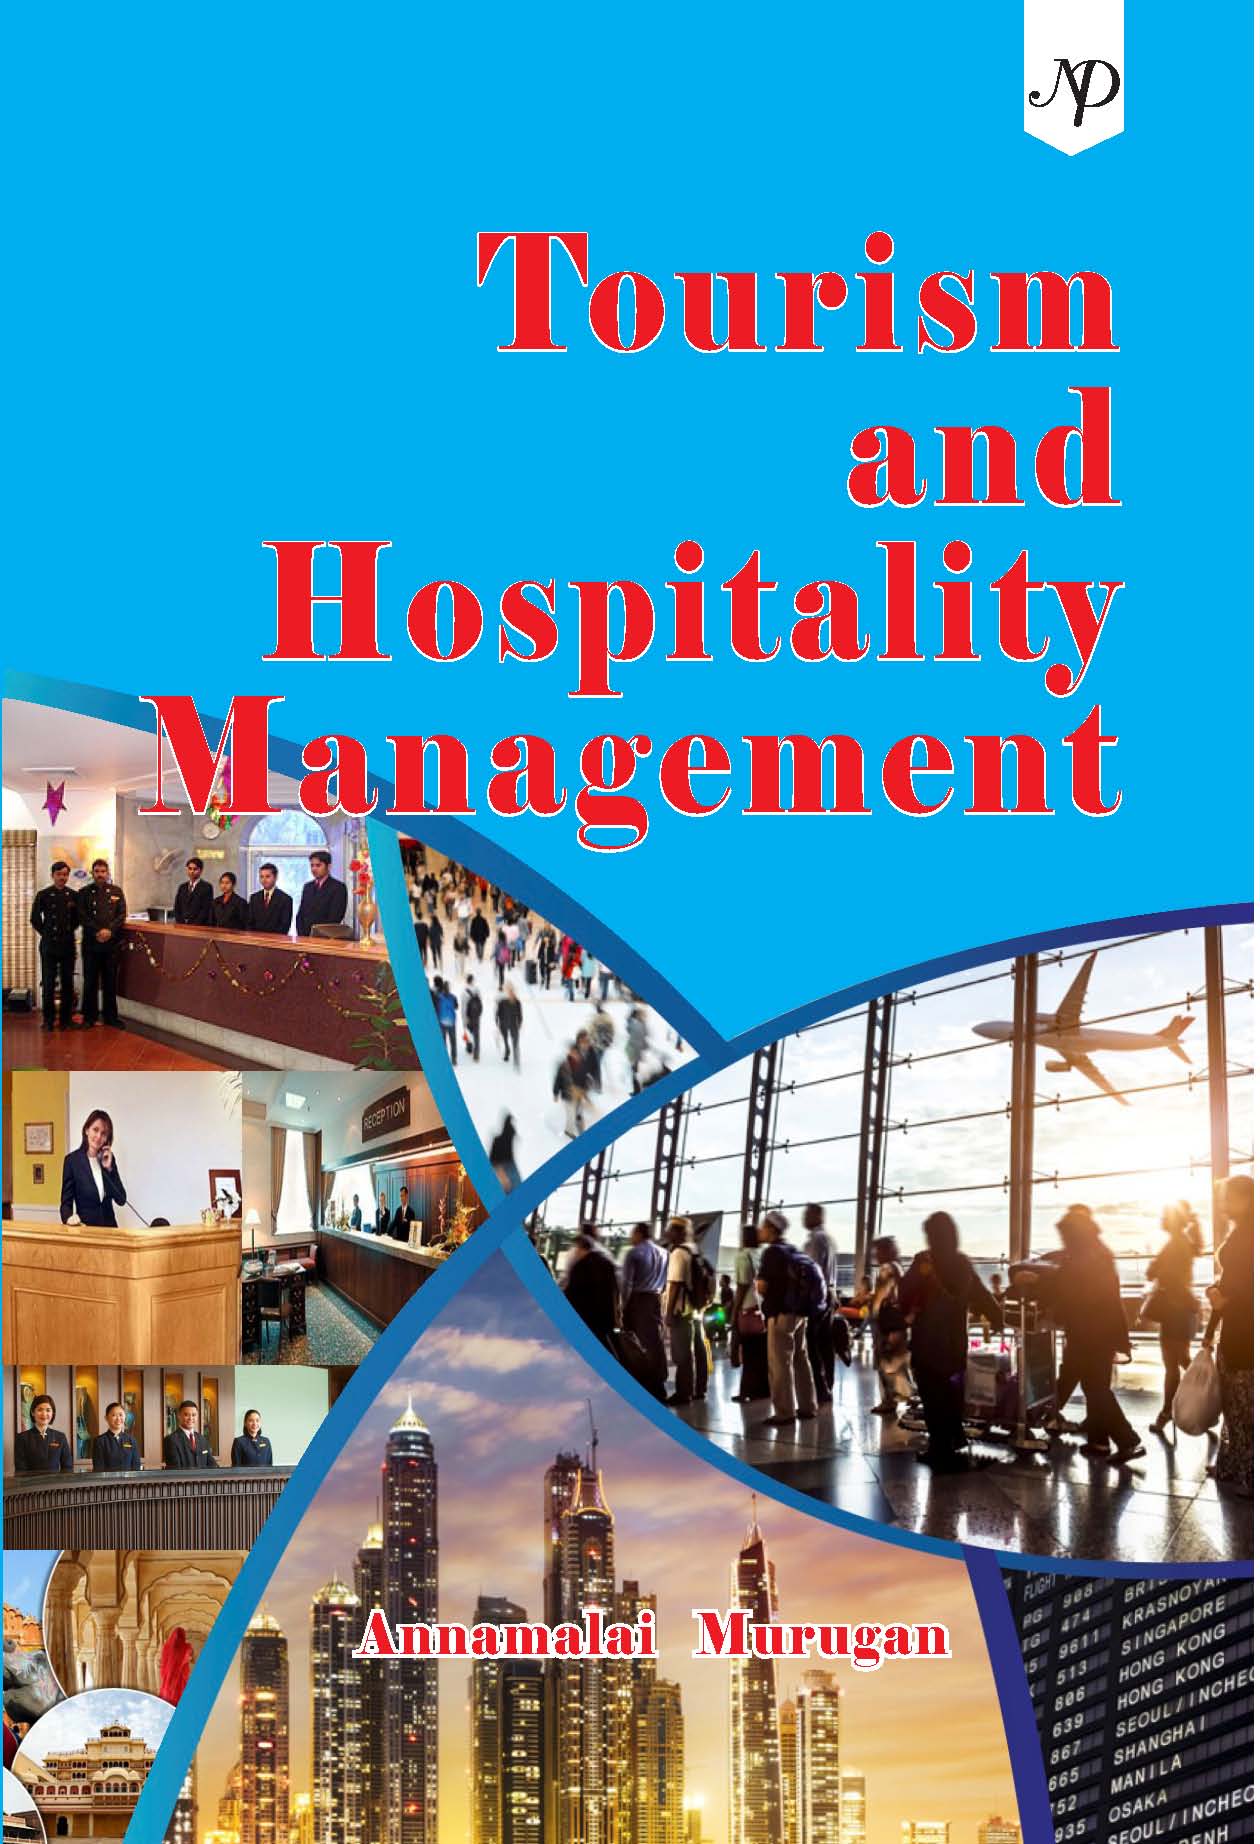 Tourism and Hospitality Management Cover.jpg